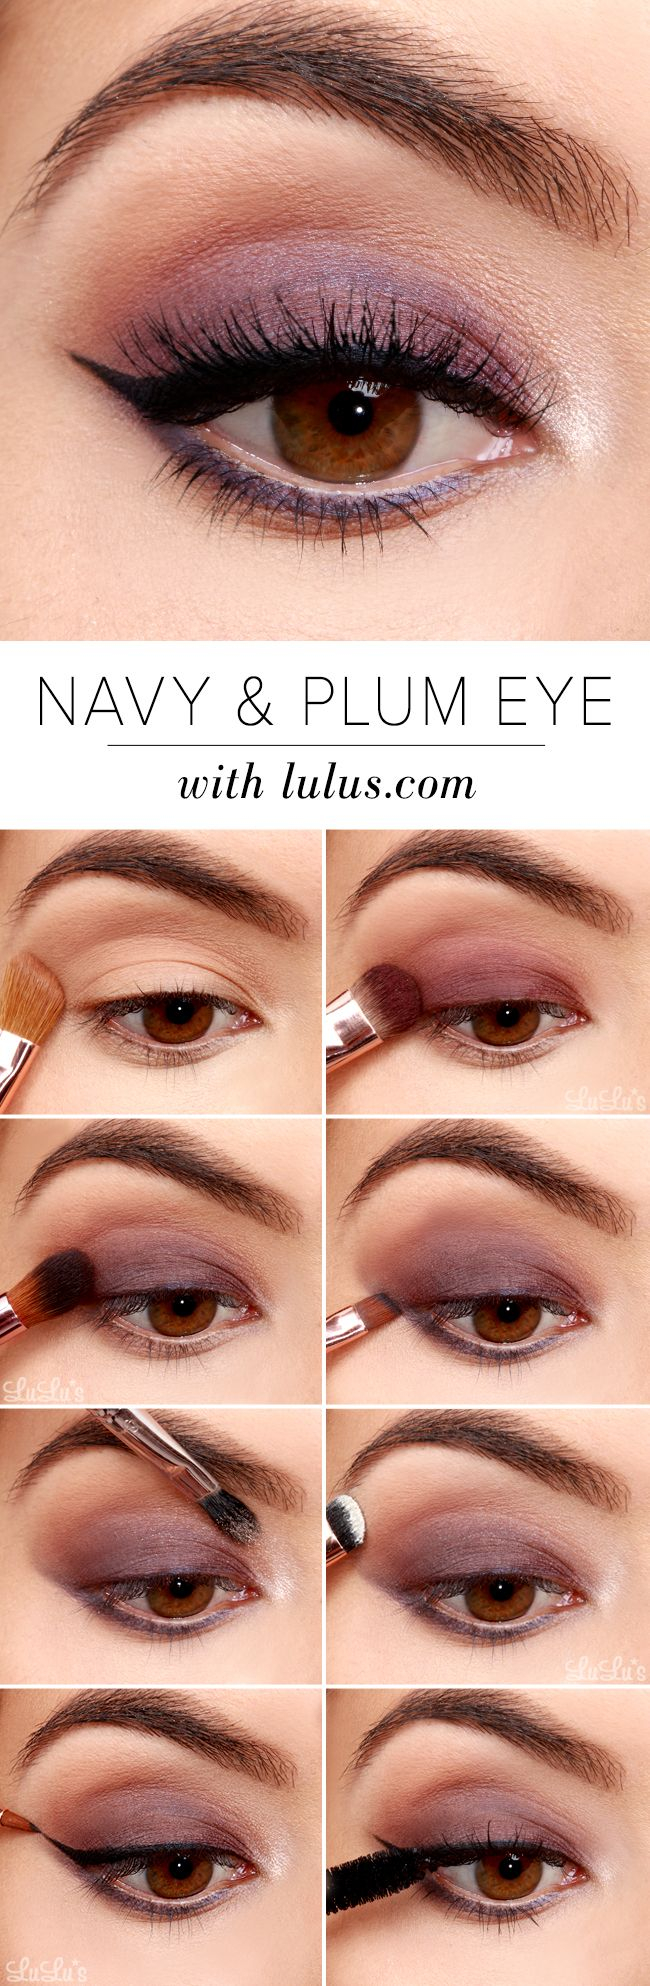 Makeup For Homecoming For Brown Eyes 27 Pretty Makeup Tutorials For Brown Eyes Styles Weekly